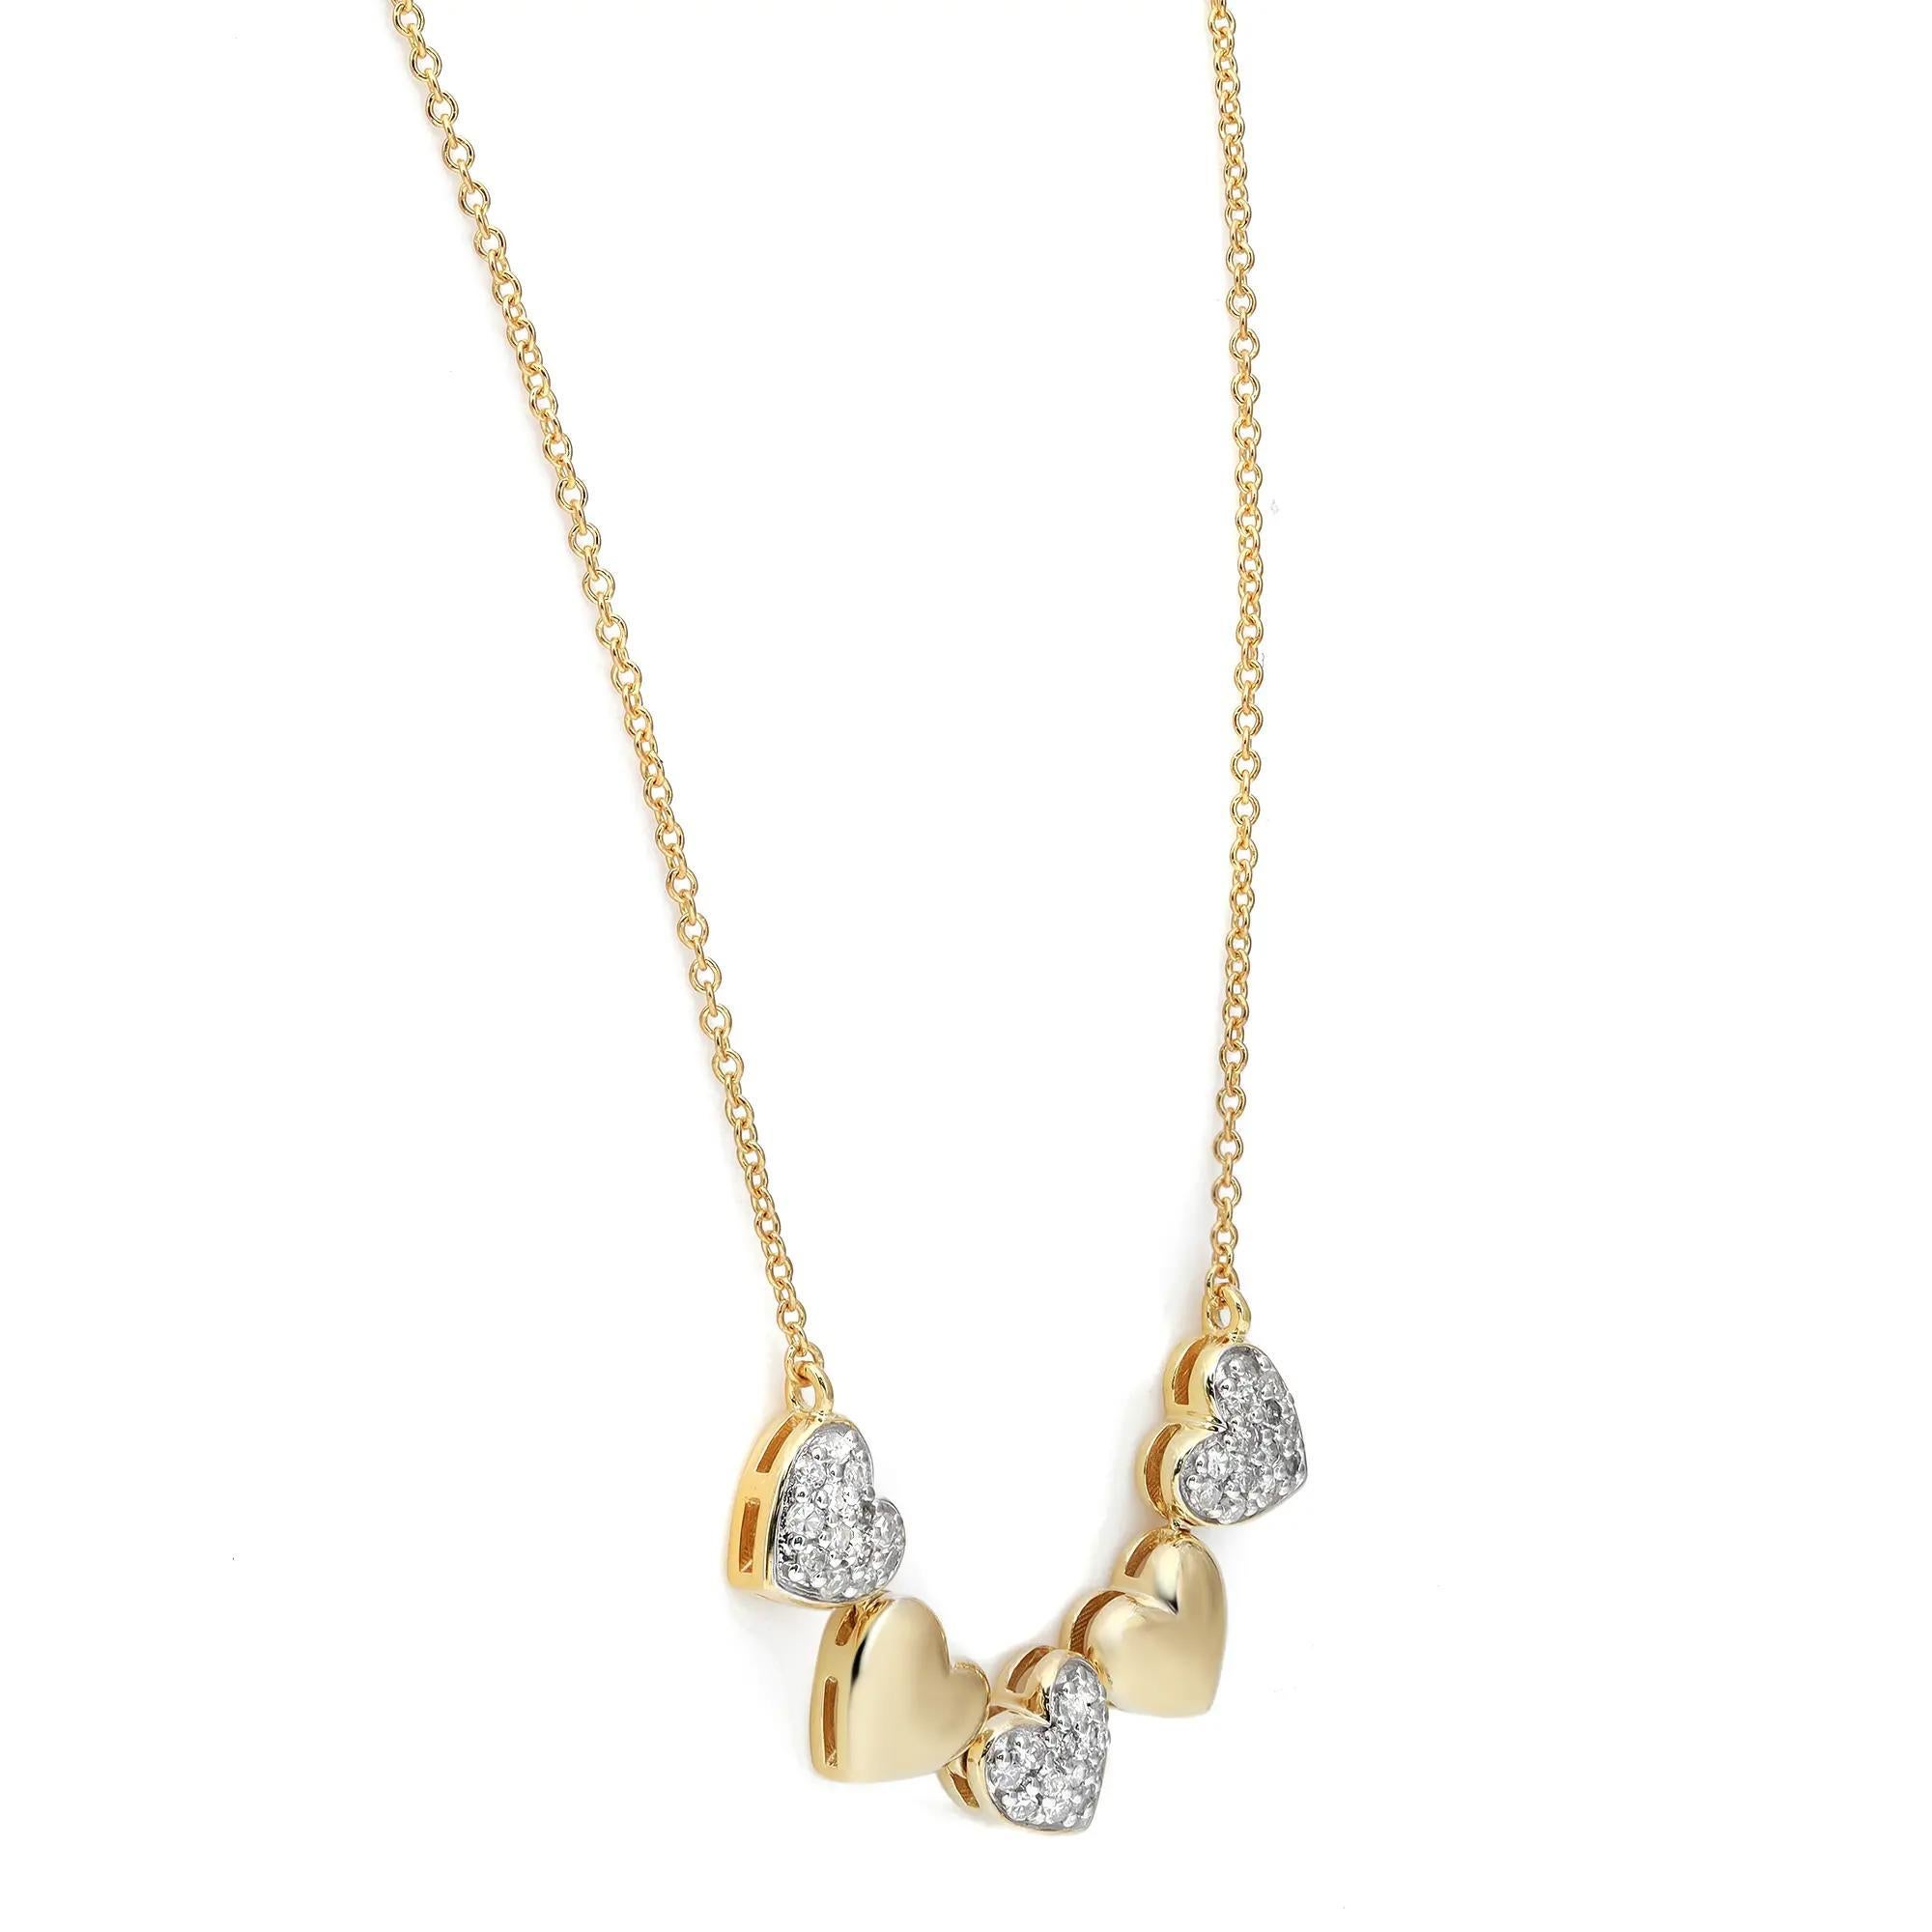 Adorn the stunning statement look with this beautiful heart shape pendant necklace. Crafted in 14K yellow gold. It features five alternate pave set round cut diamond studded heart shape shanks attached together. Easy to wear feminine and flirty.